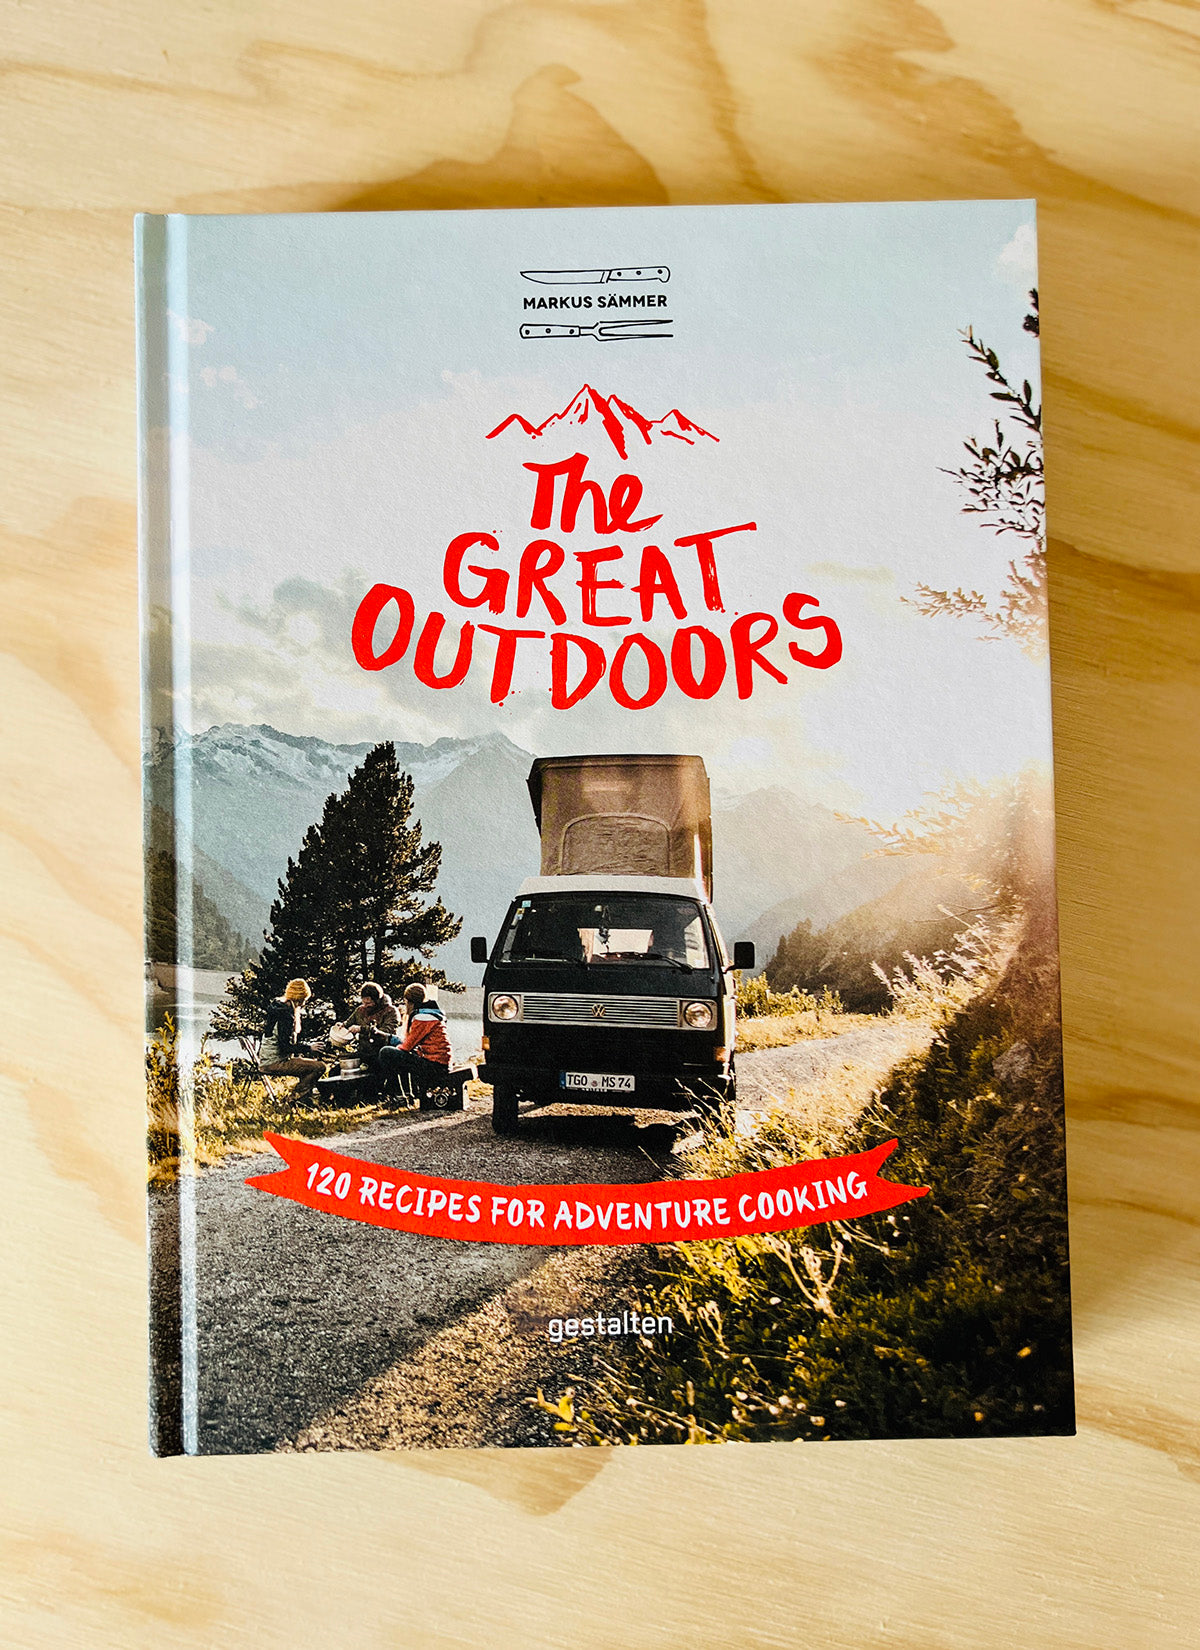 Book "The Great Outdoors"